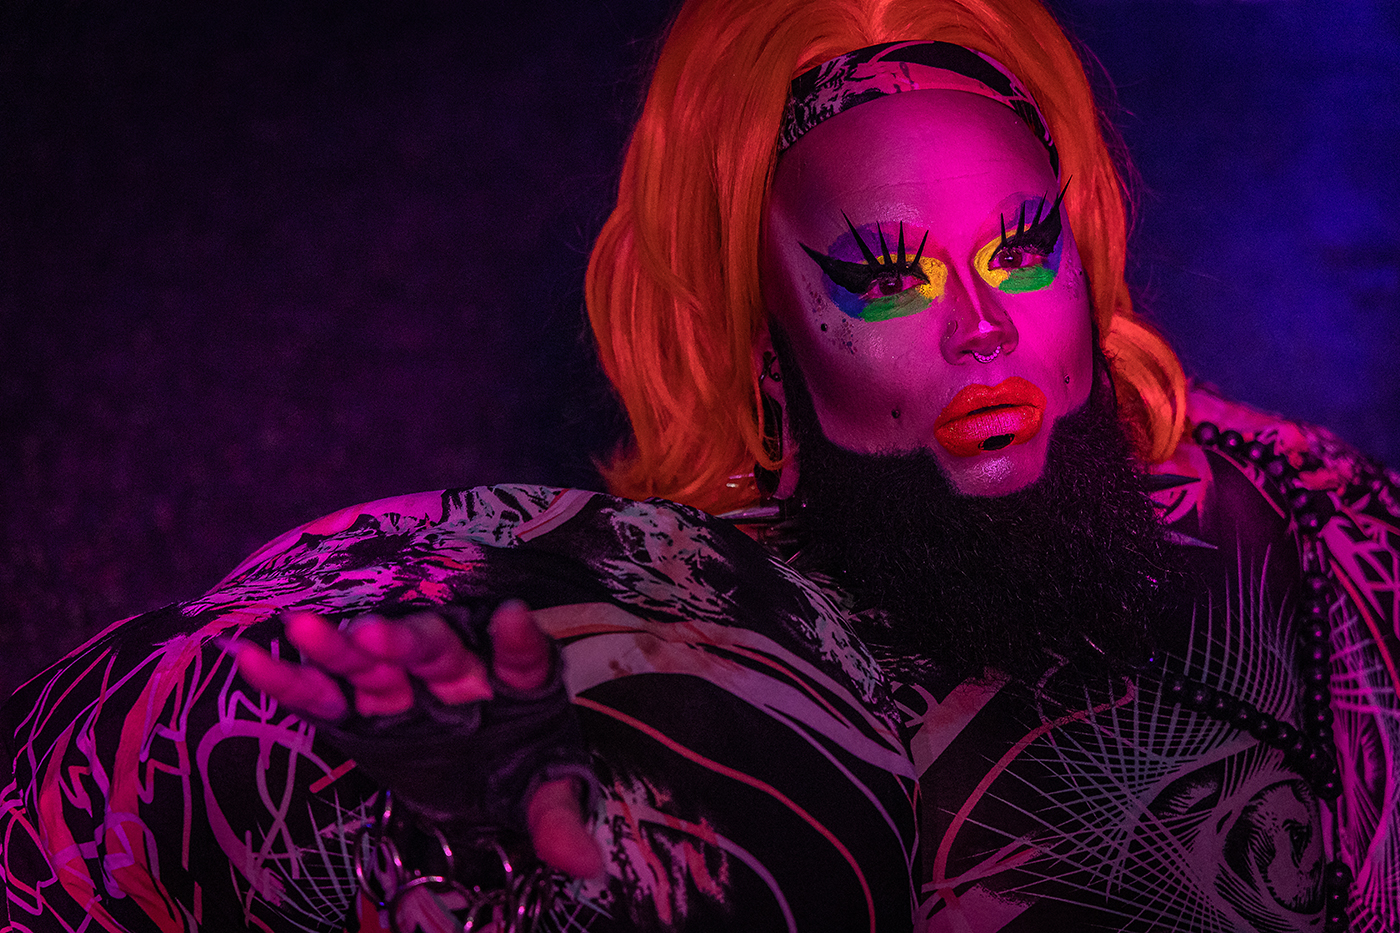 Ursula Major is a newcomer to the Salt Lake drag scene and is already making her mark in the city.